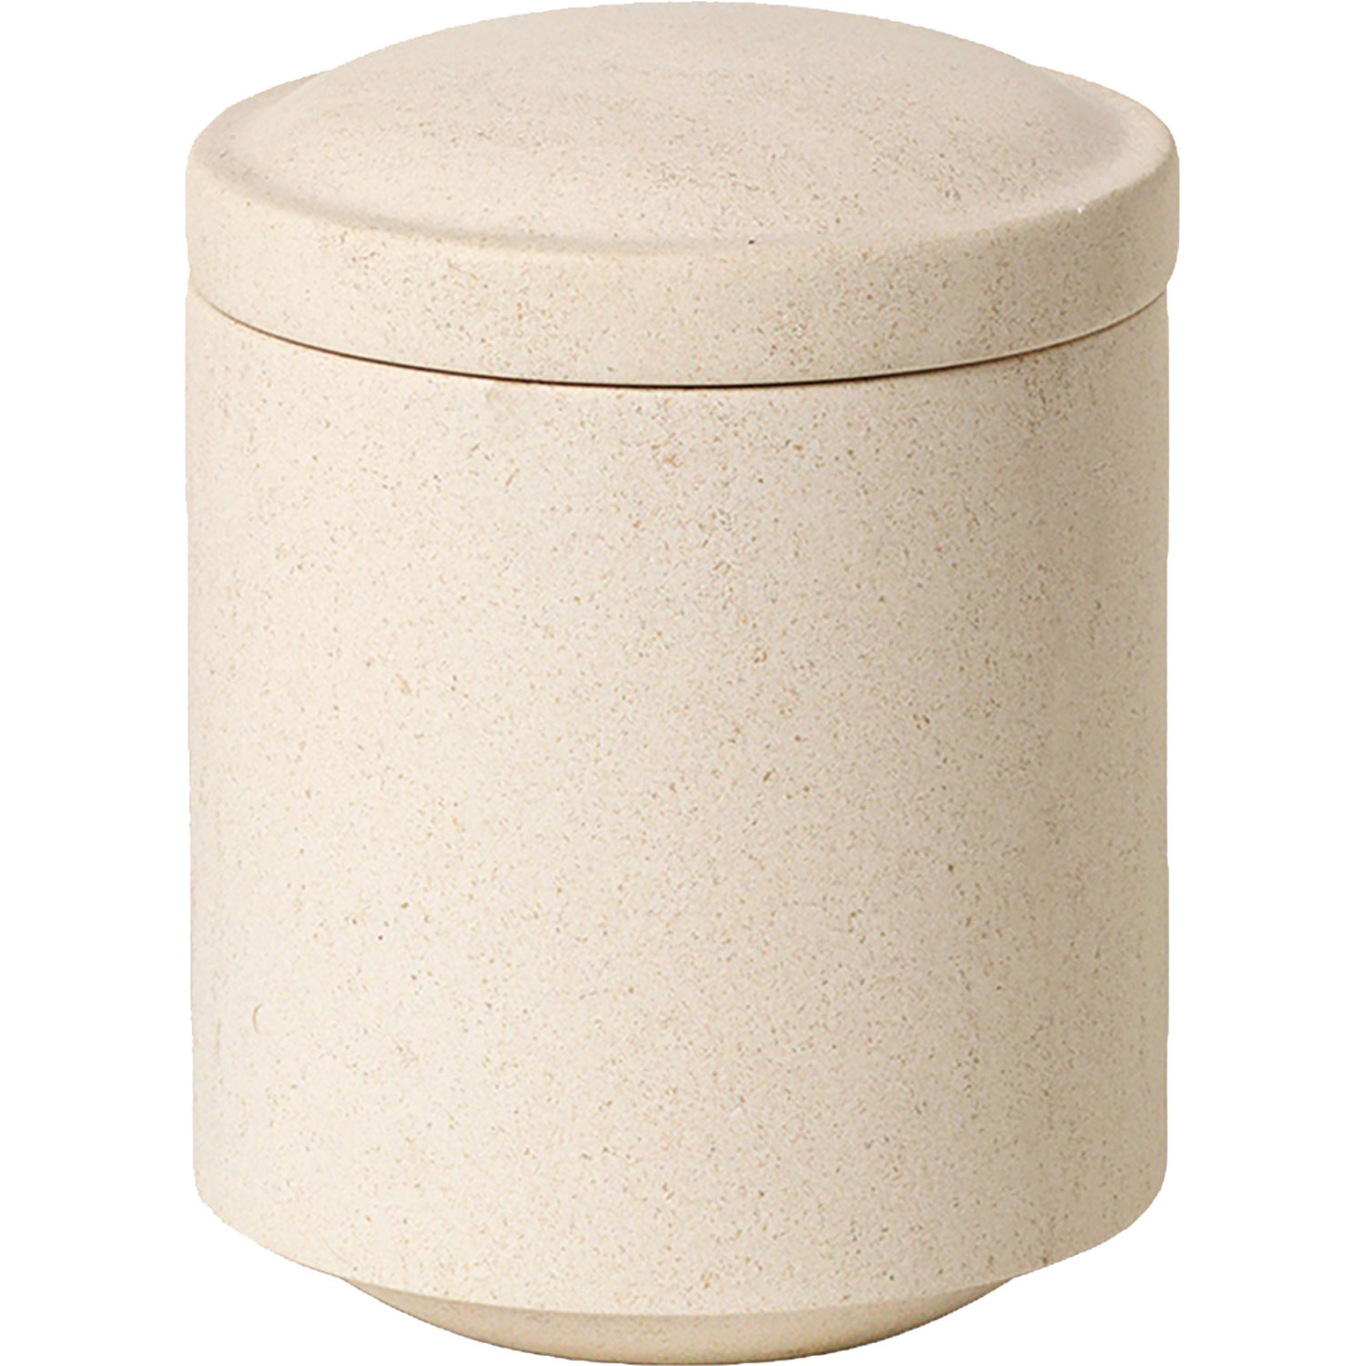 Gallery Objects Pot 14 cm, Lime Stone